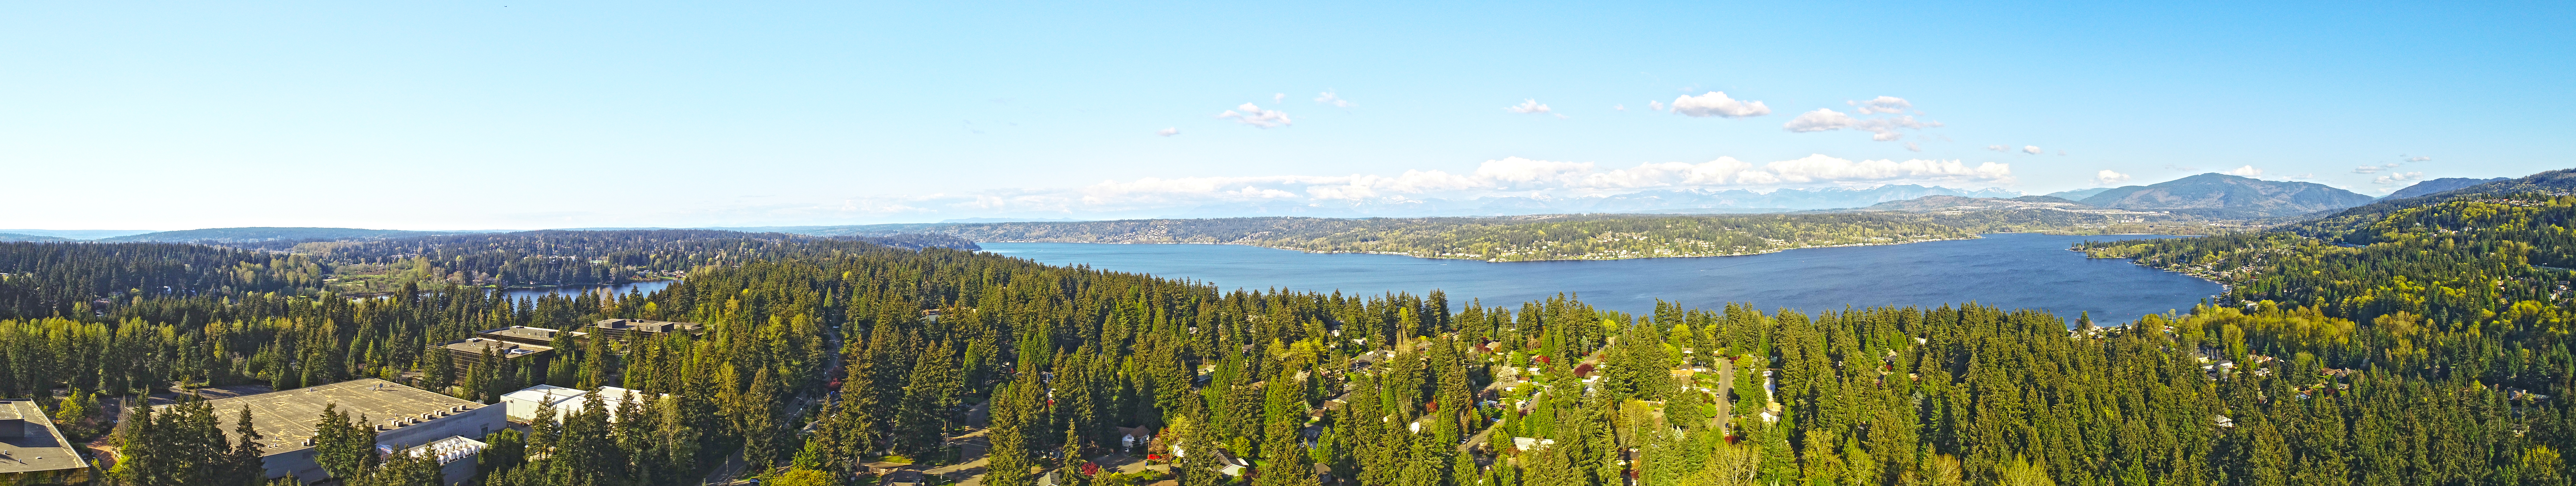 Featured image for the Reviewing and Updating Preferred Tree List for the City of Issaquah, WA project.